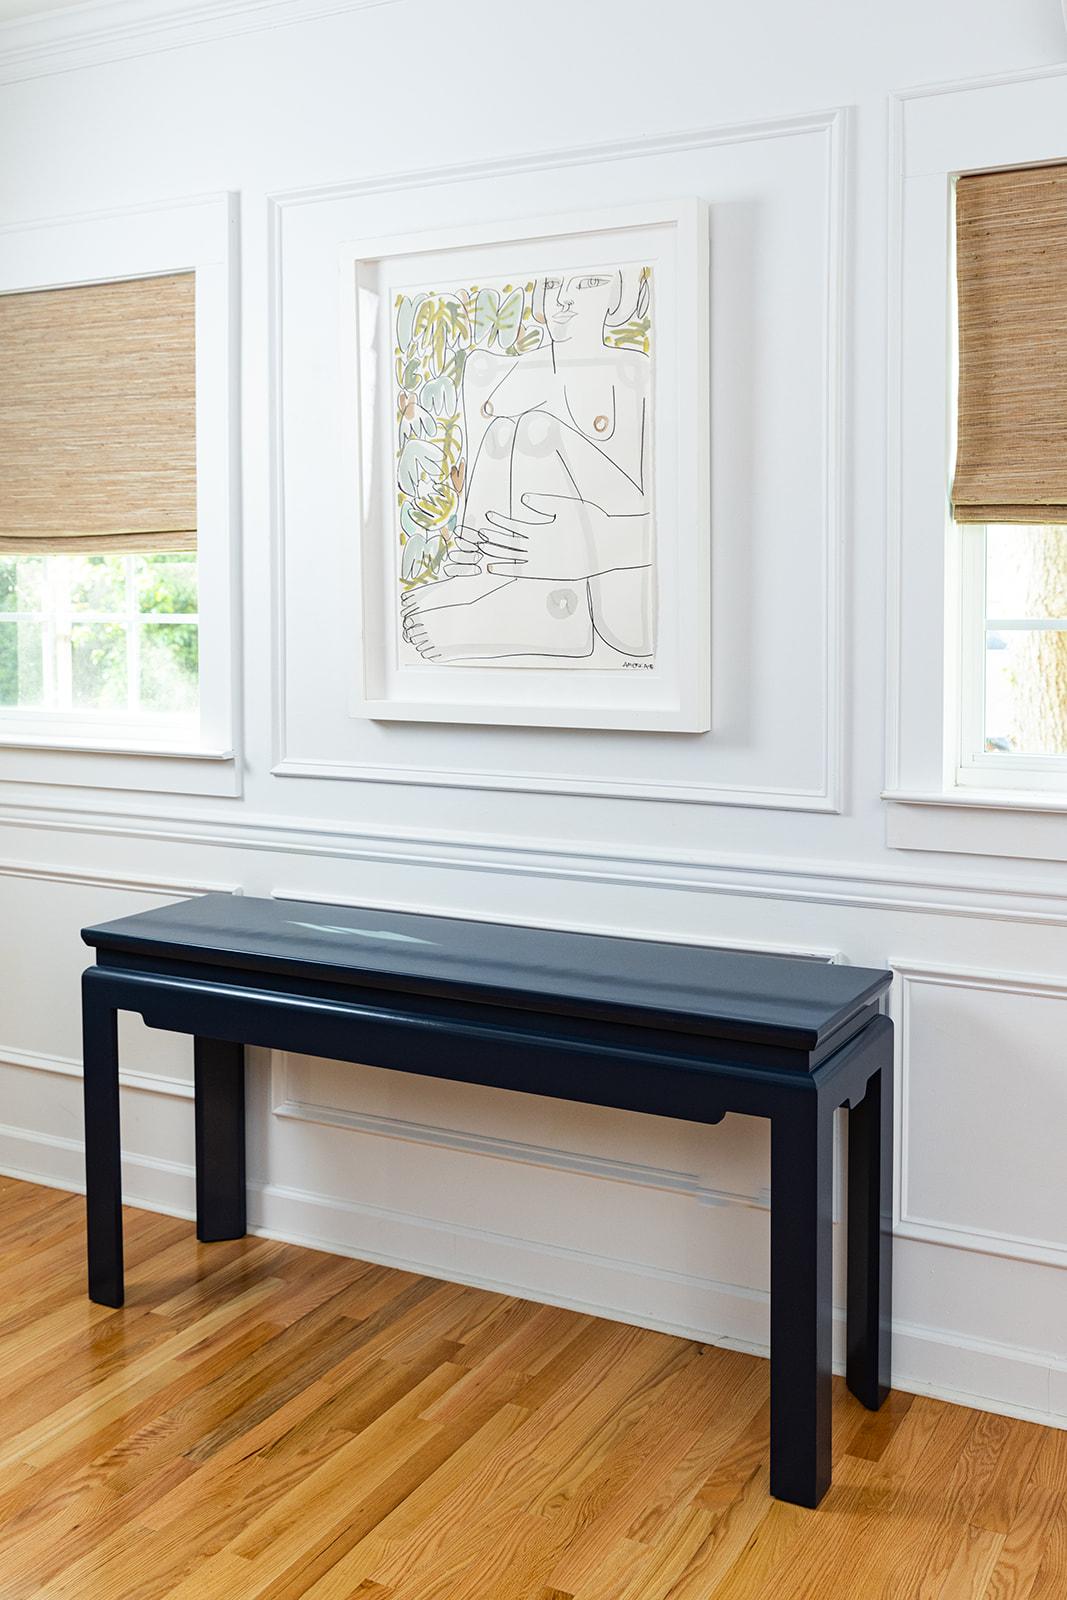 Rail & Stile Bespoke Furniture Collection: Modern Ming - Vintage feel, Modern size. Our bespoke console inspired by Chinese Ming Dynasty profiles has been reimagined for modern-day interiors with graceful lines and modern sizing. It measures 60”